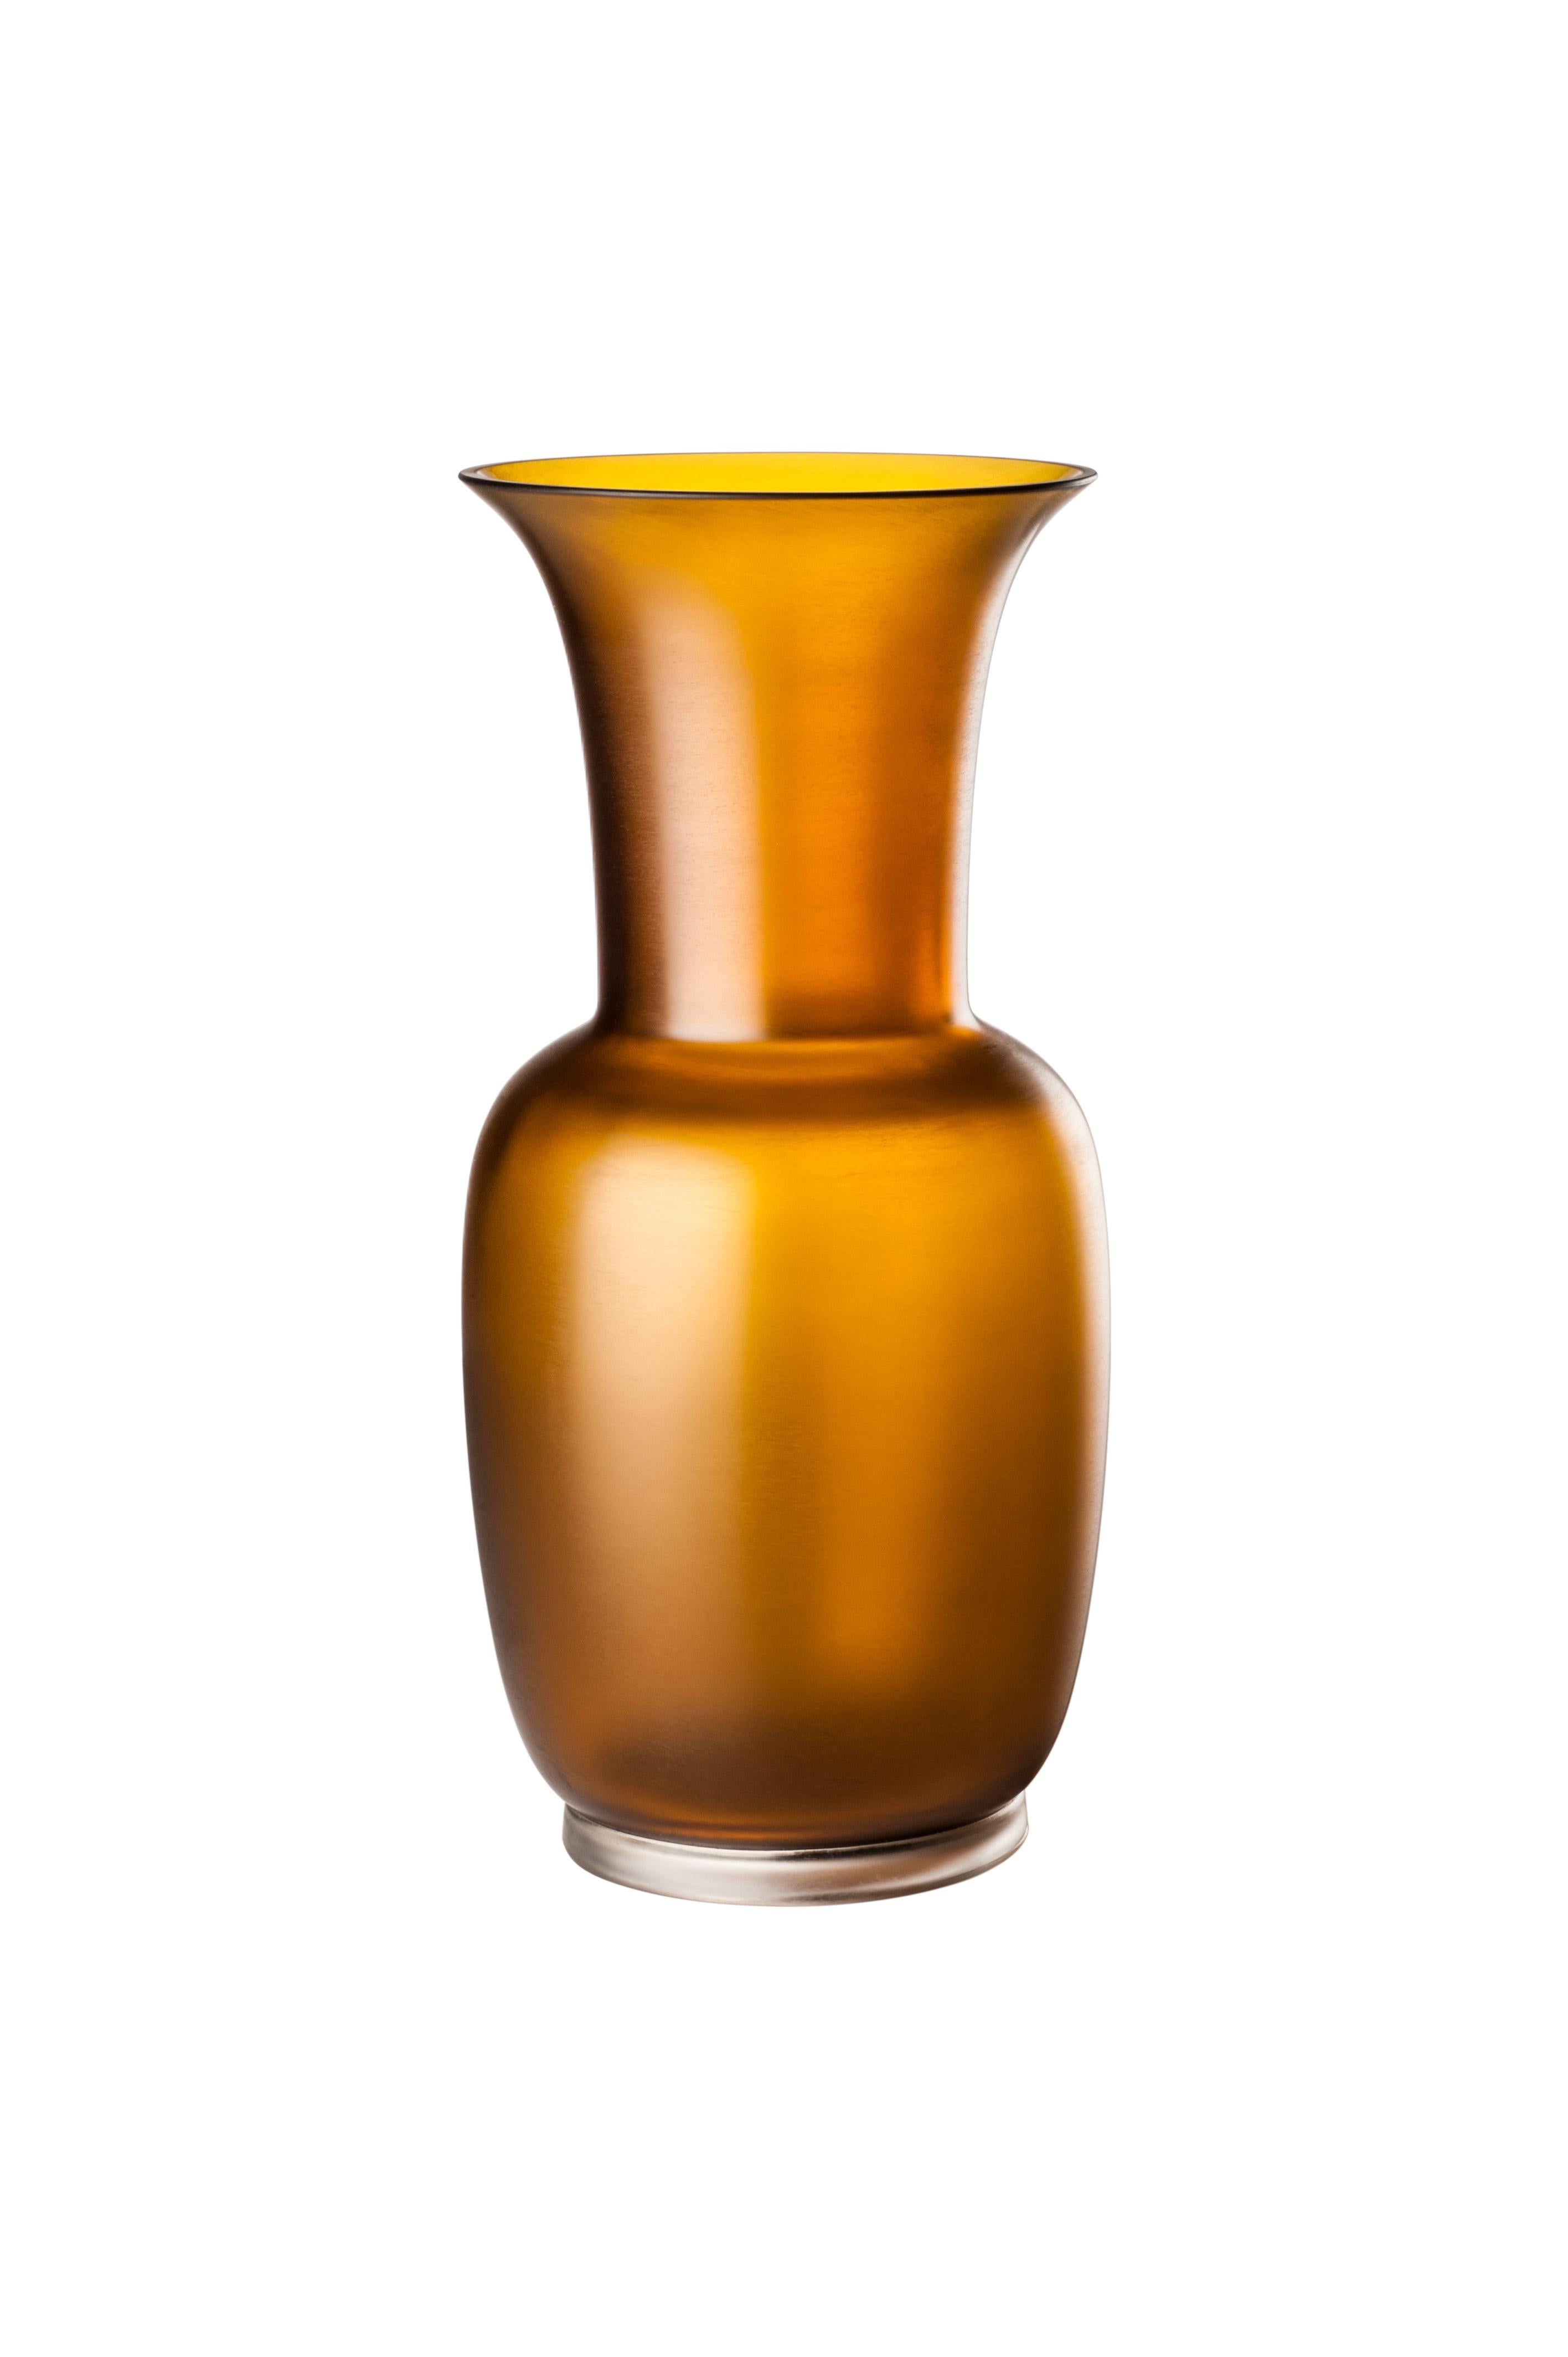 Venini glass vase with slim, oval shaped body and funnel shaped neck. Featured in tea and crystal colored glass. Perfect for indoor home decor as container or strong statement piece for any room.

Dimensions: 17 cm diameter x 36 cm height.